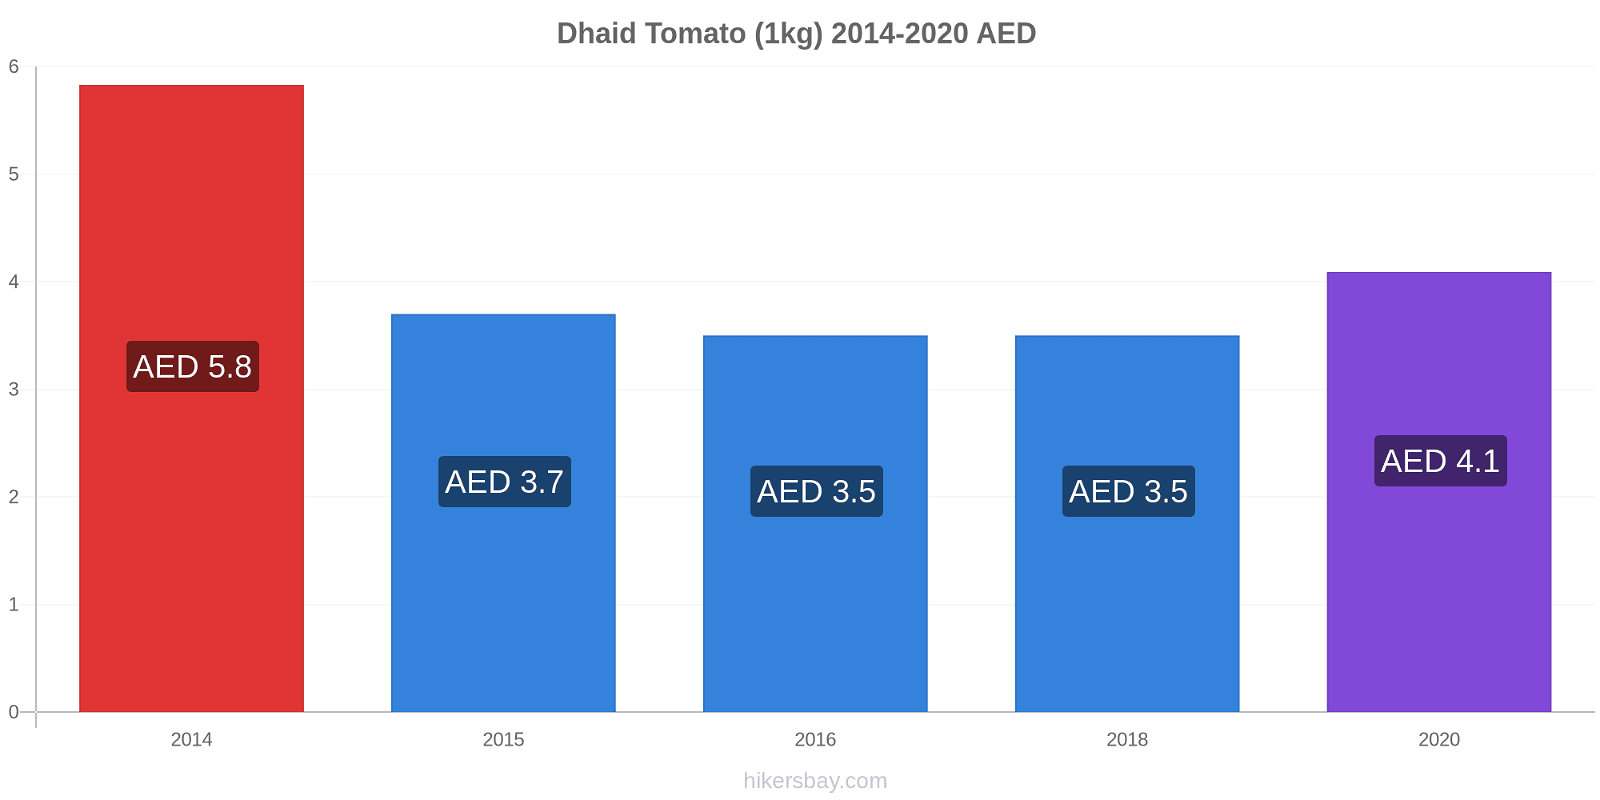 Dhaid price changes Tomato (1kg) hikersbay.com